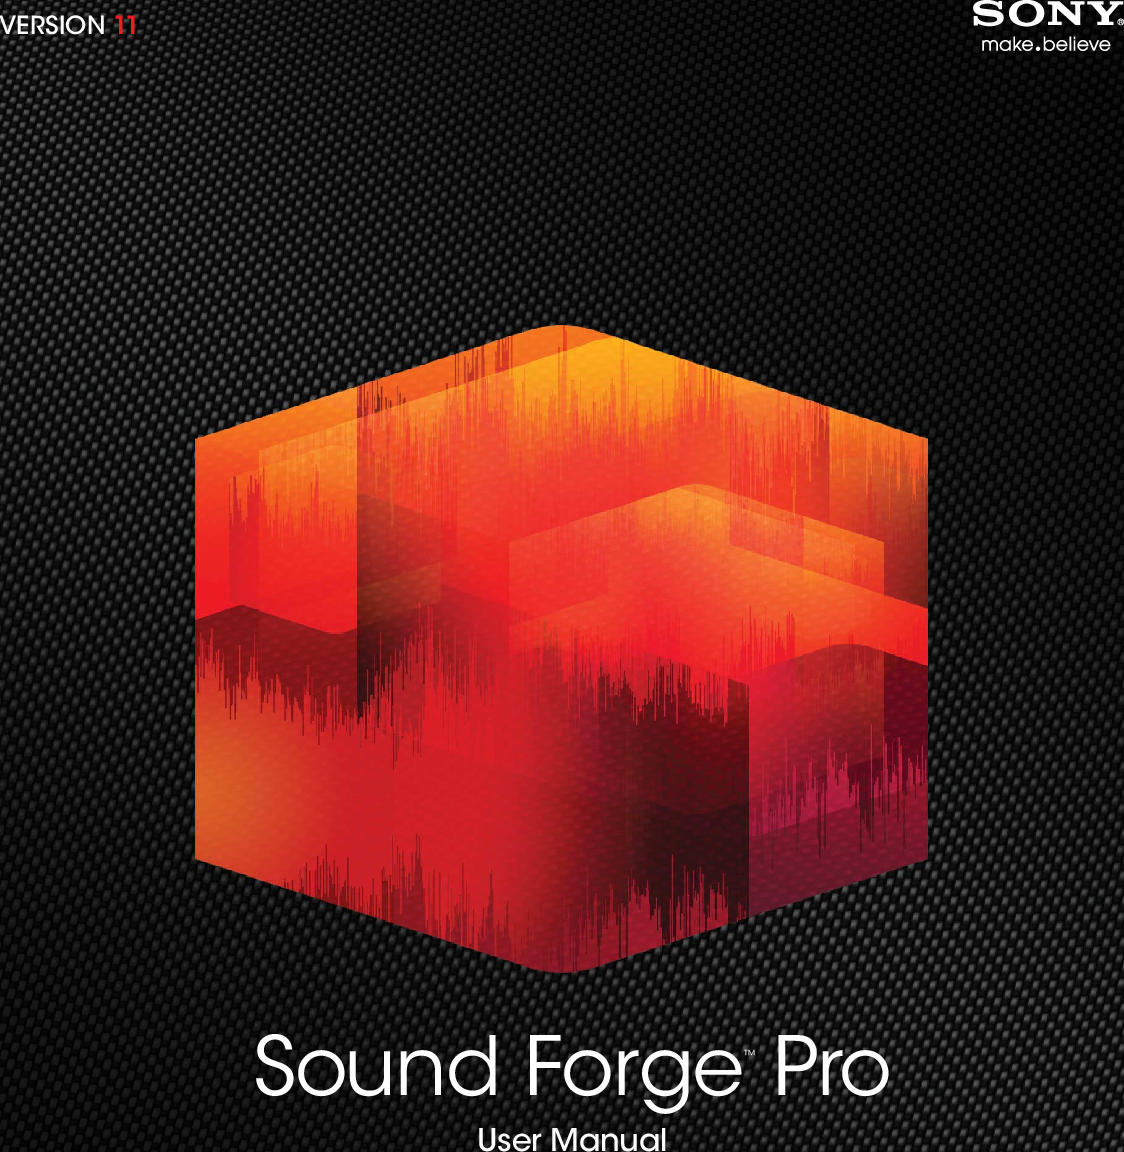 how to connect an interface to sony sound forge 9